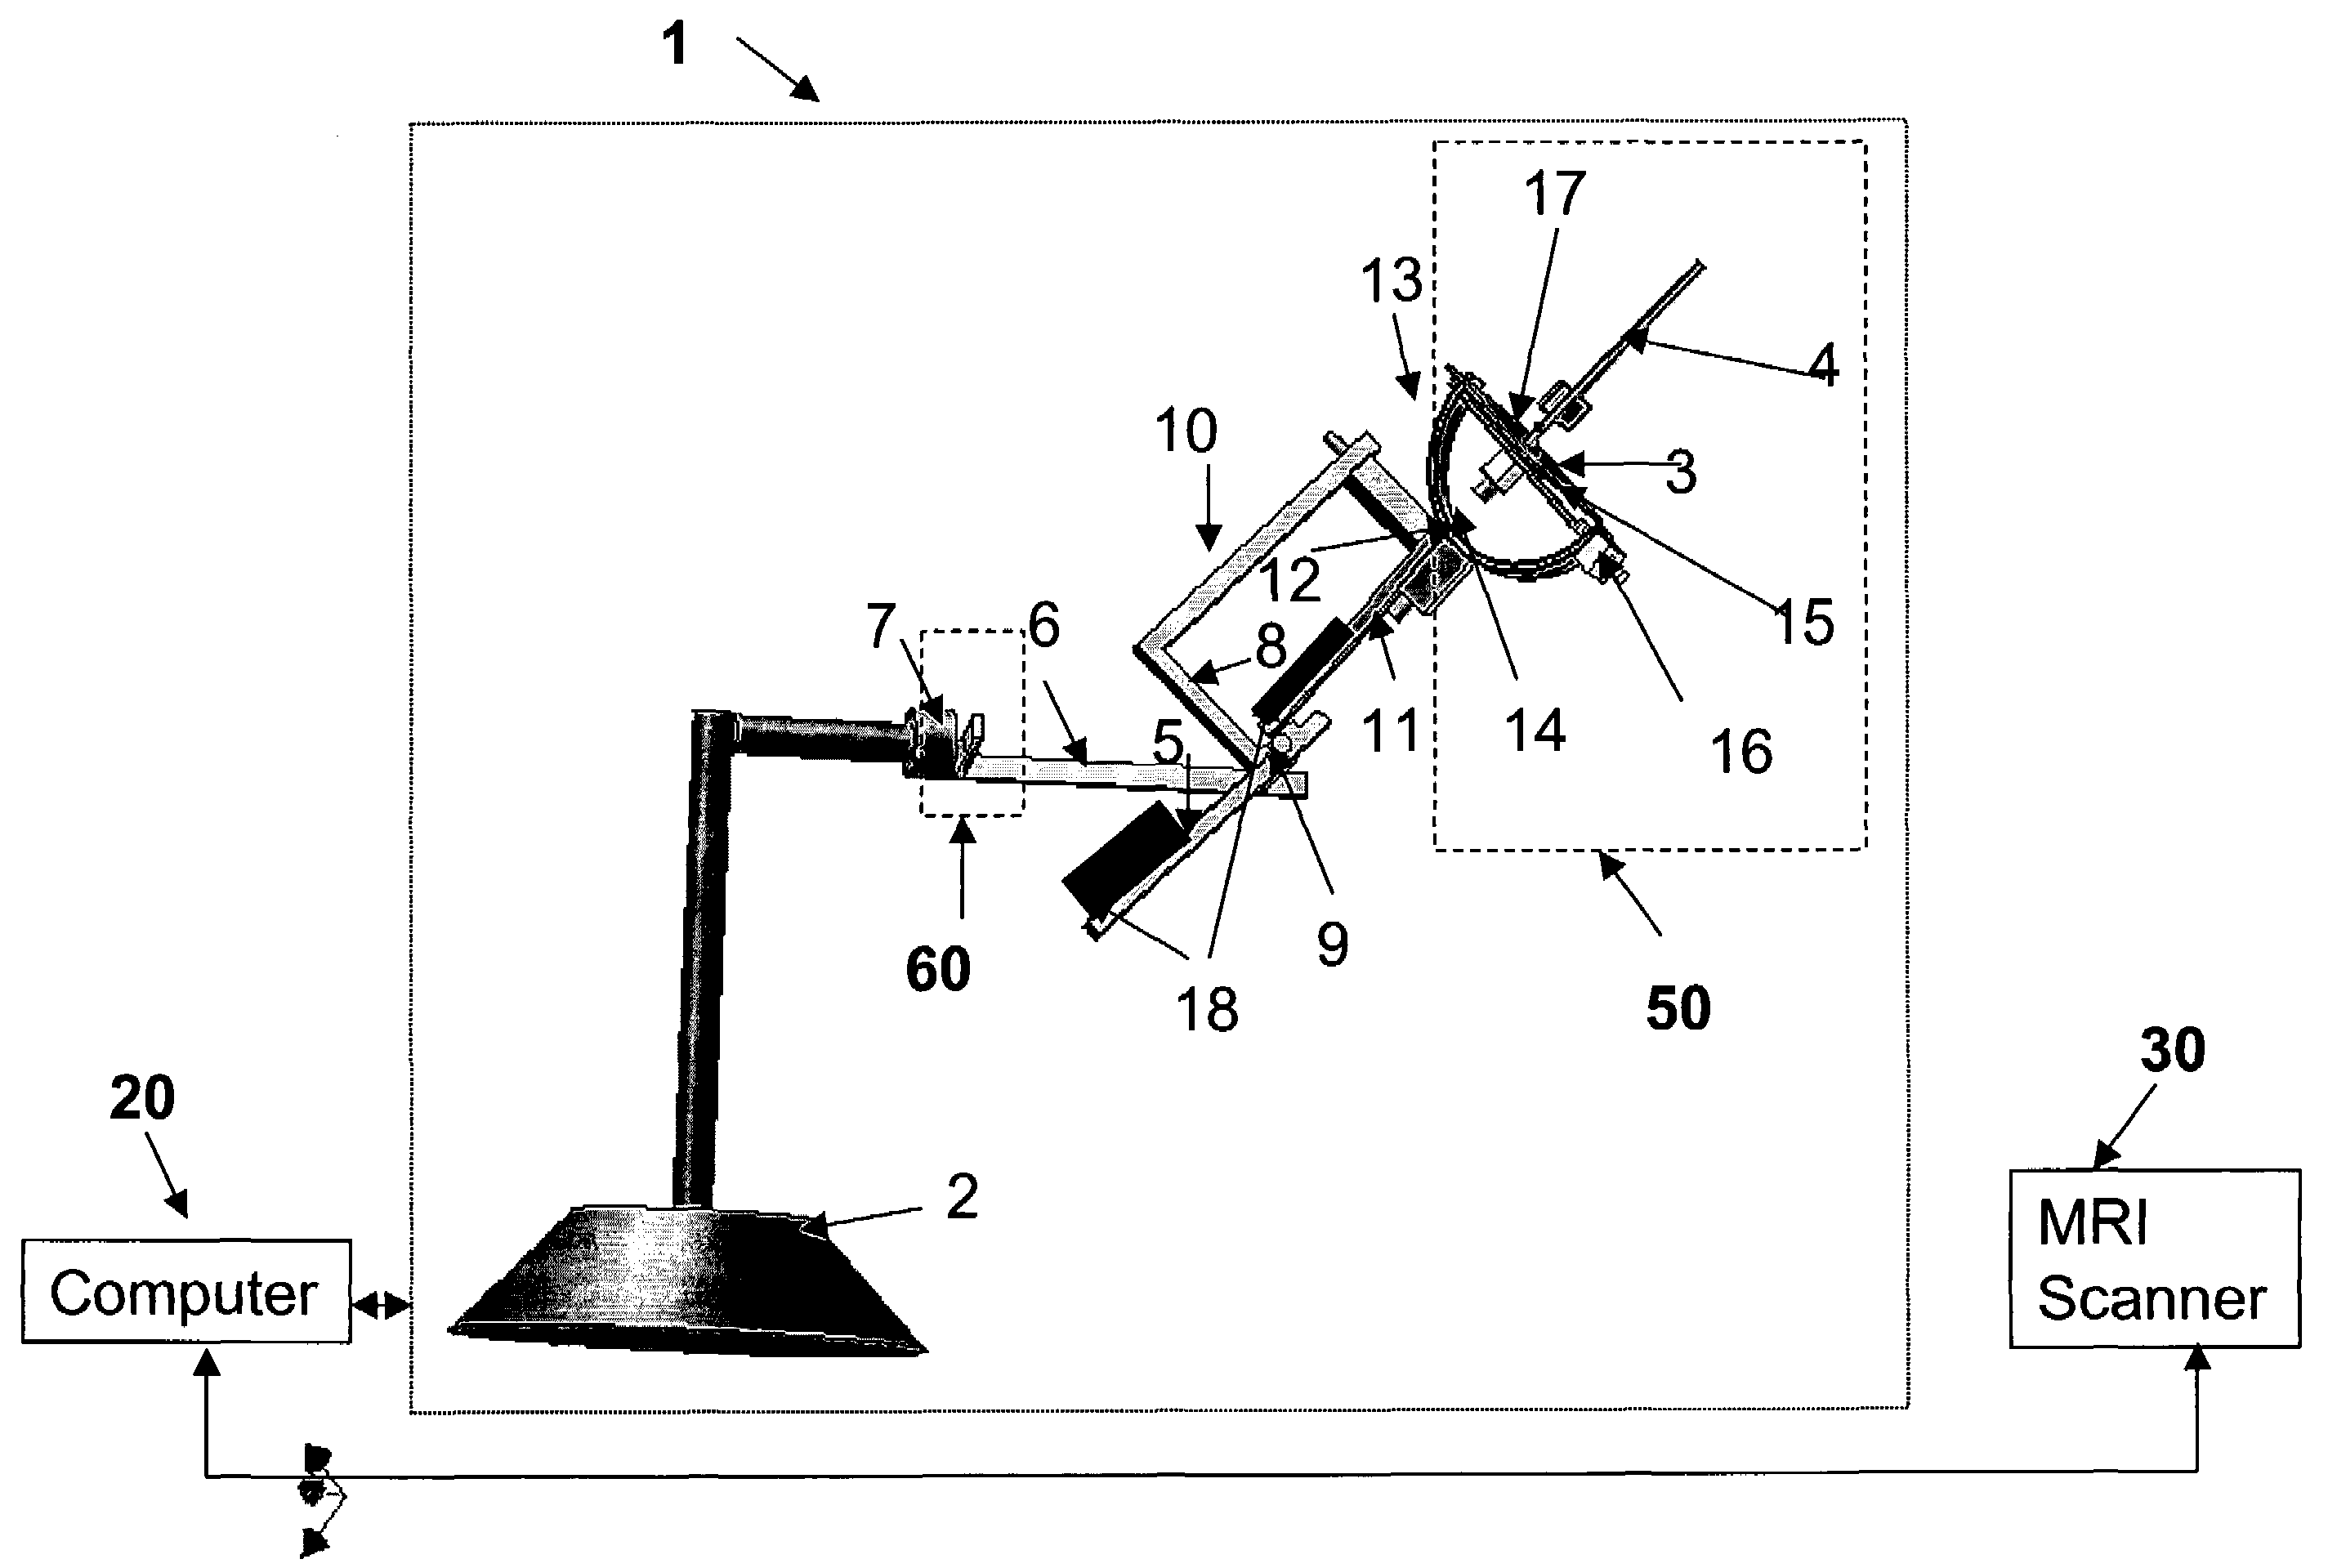 Device and process for manipulating real and virtual objects in three-dimensional space